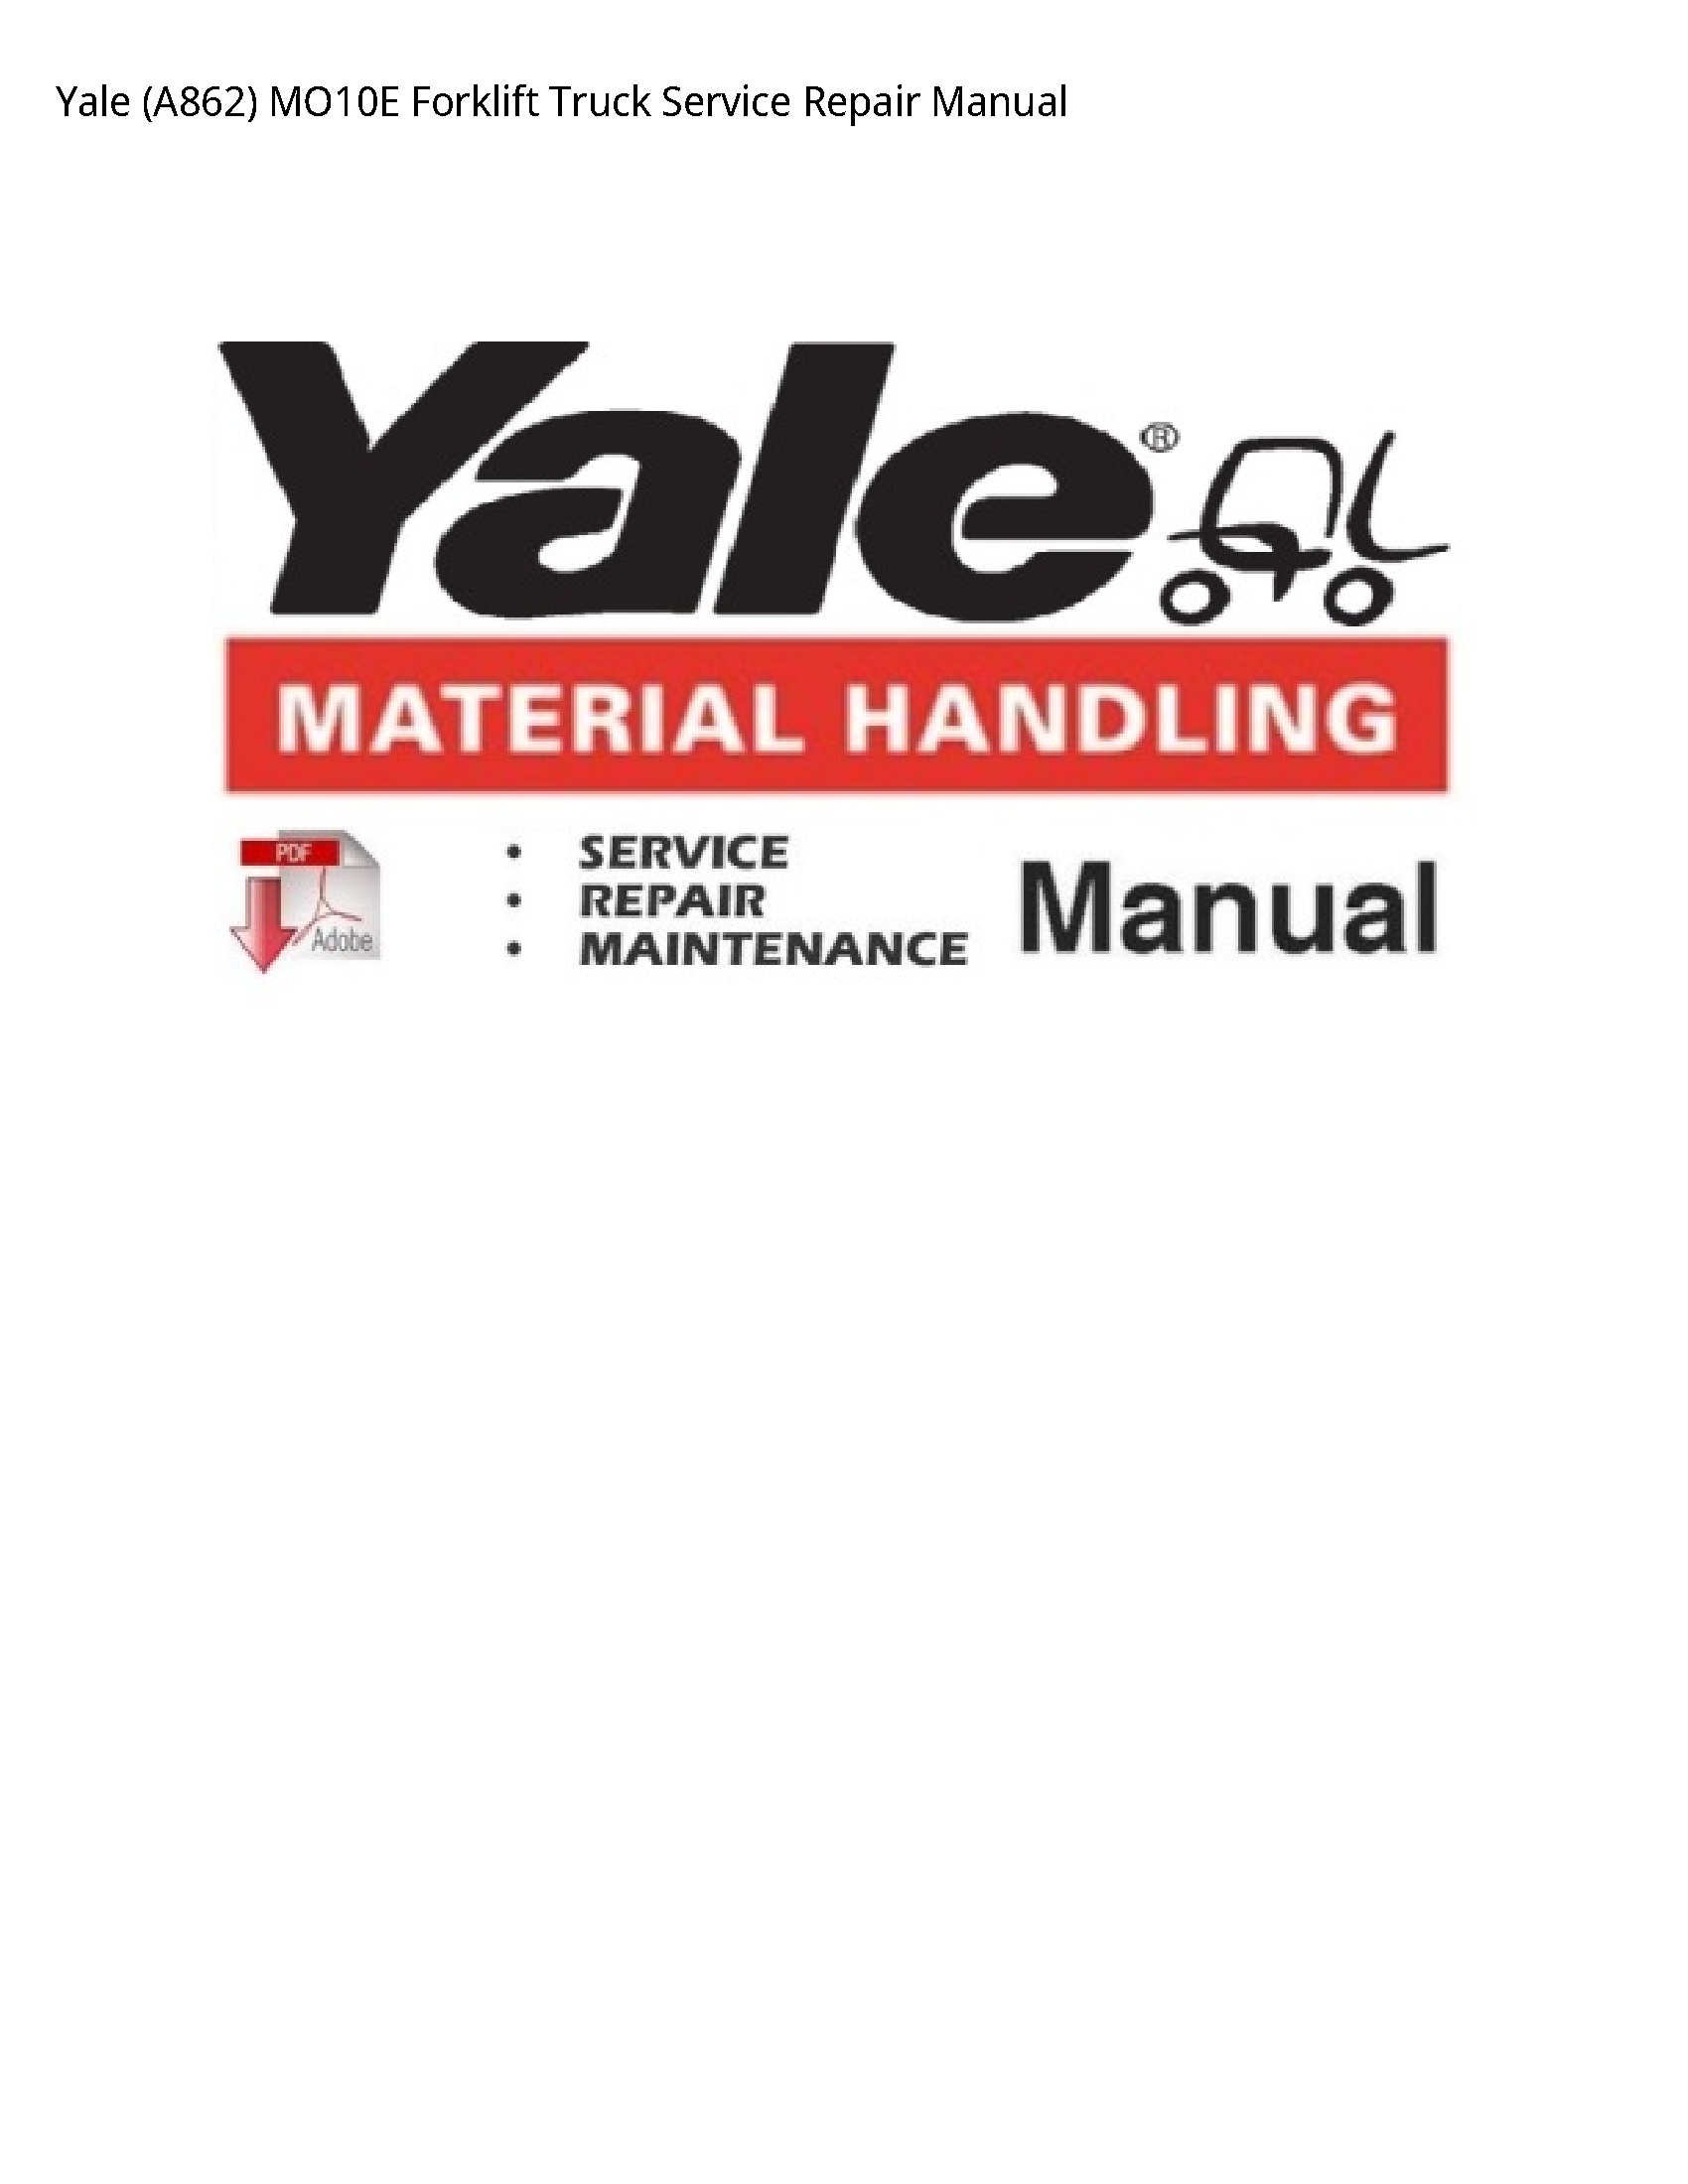 Yale (A862) Forklift Truck manual